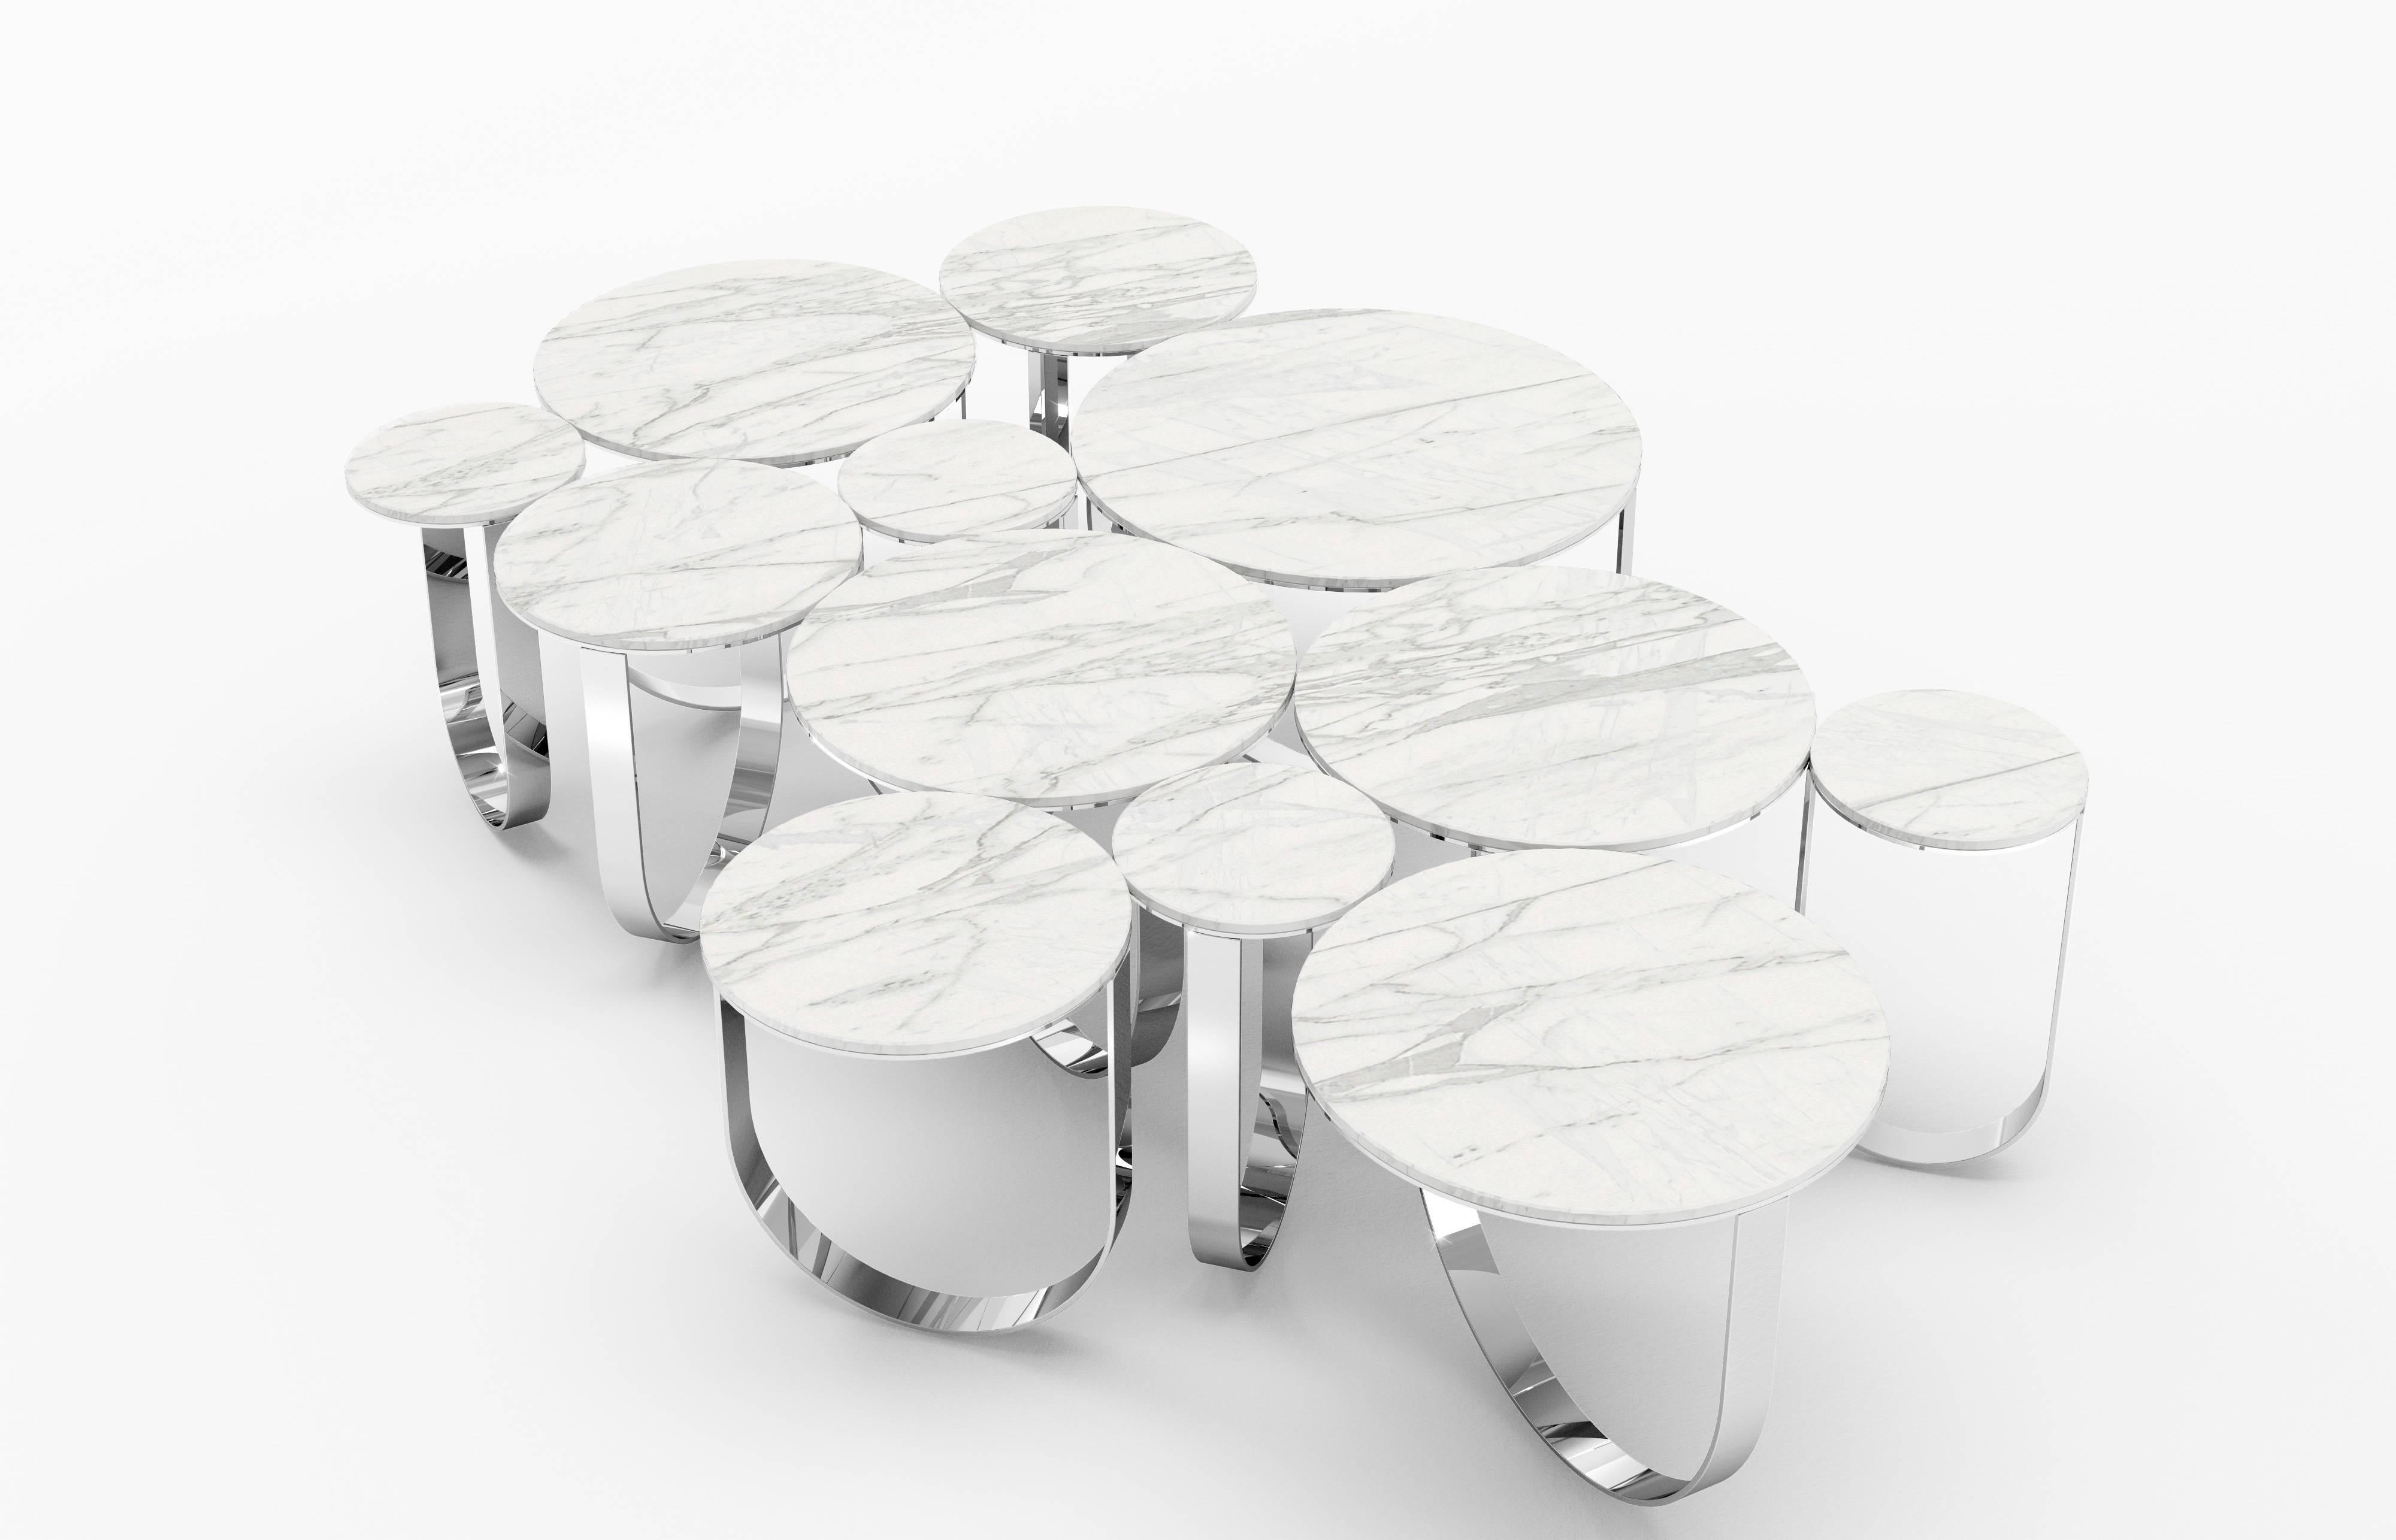 The 'Cloud' is a spectacular coffee table with structure in mirror polished stainless steel and top in statuary marble (origin: Tuscany). The mirror-like finishing of the stainless steel creates different perceptions of this particular material and